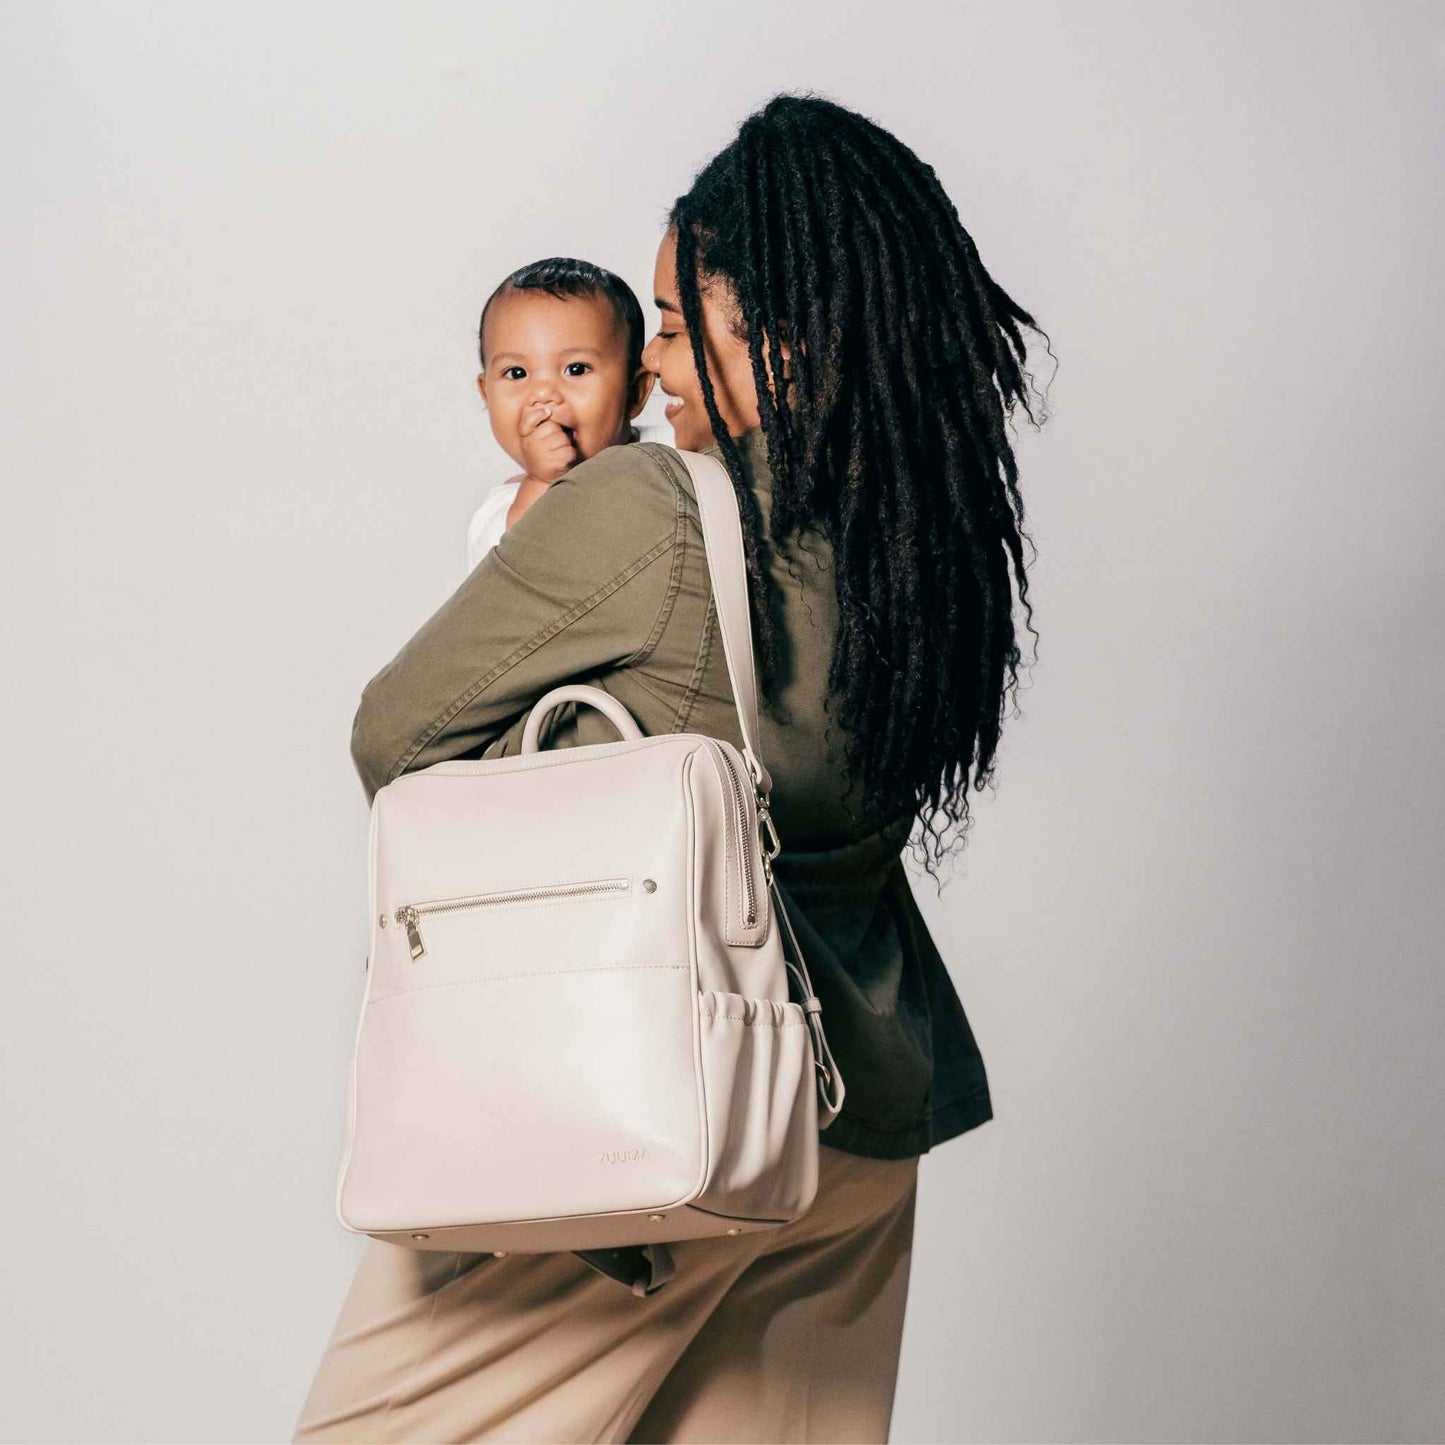 mom and baby with diaper bag from yuuma collection